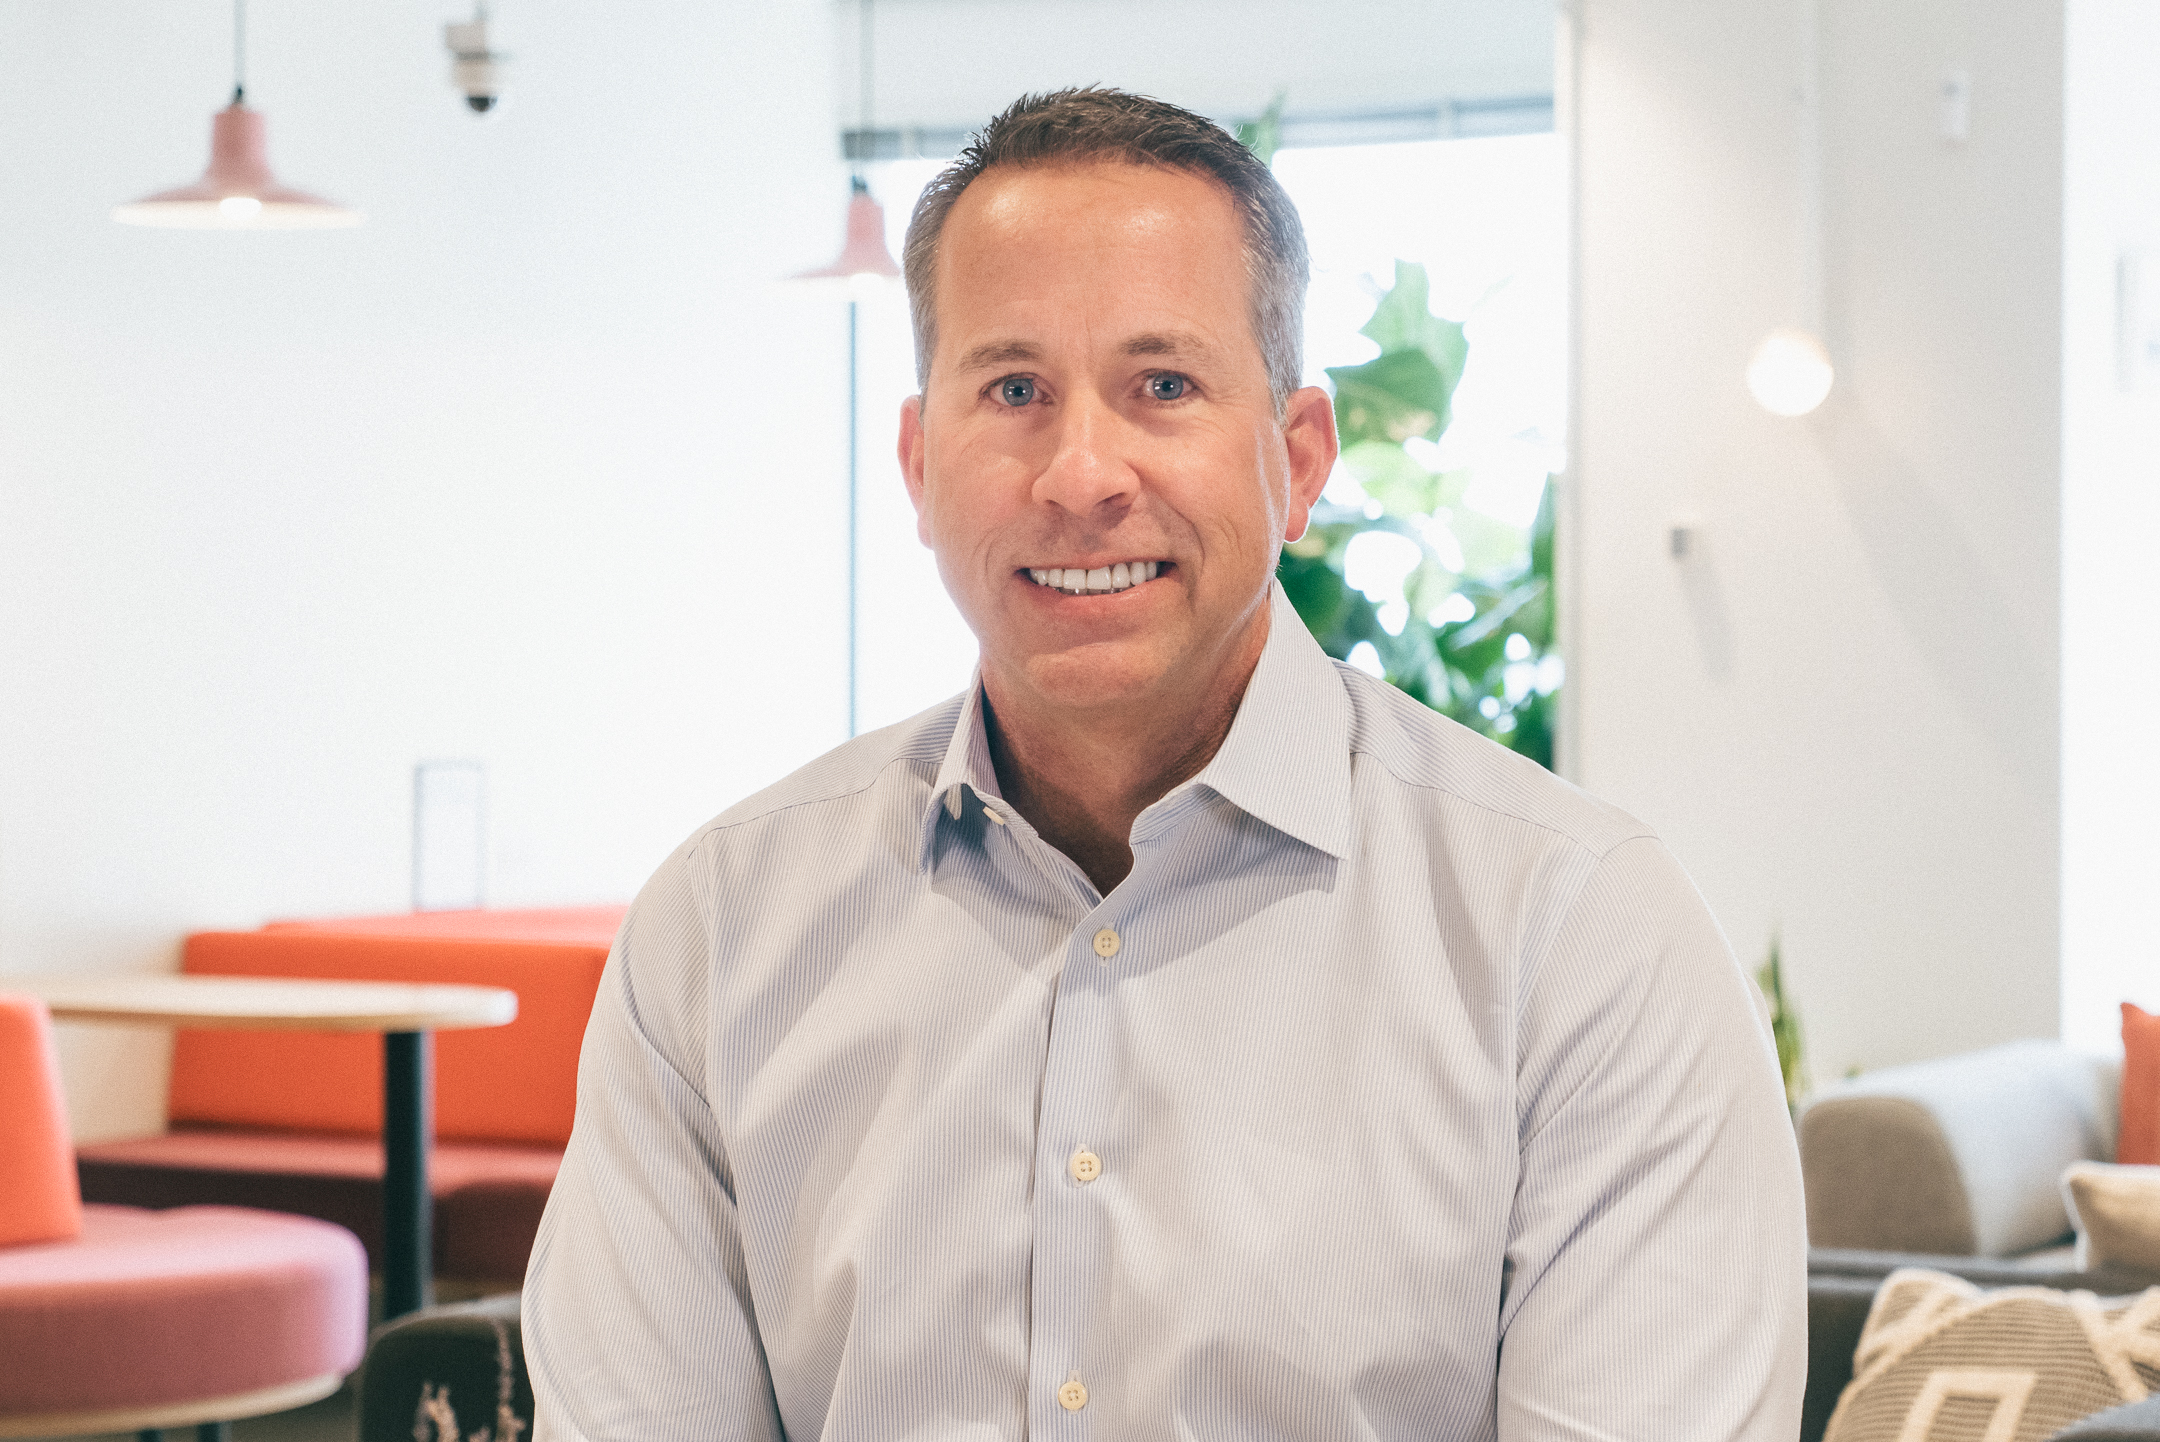 CLEERLY APPOINTS JIM HARTMAN AS CHIEF REVENUE OFFICER